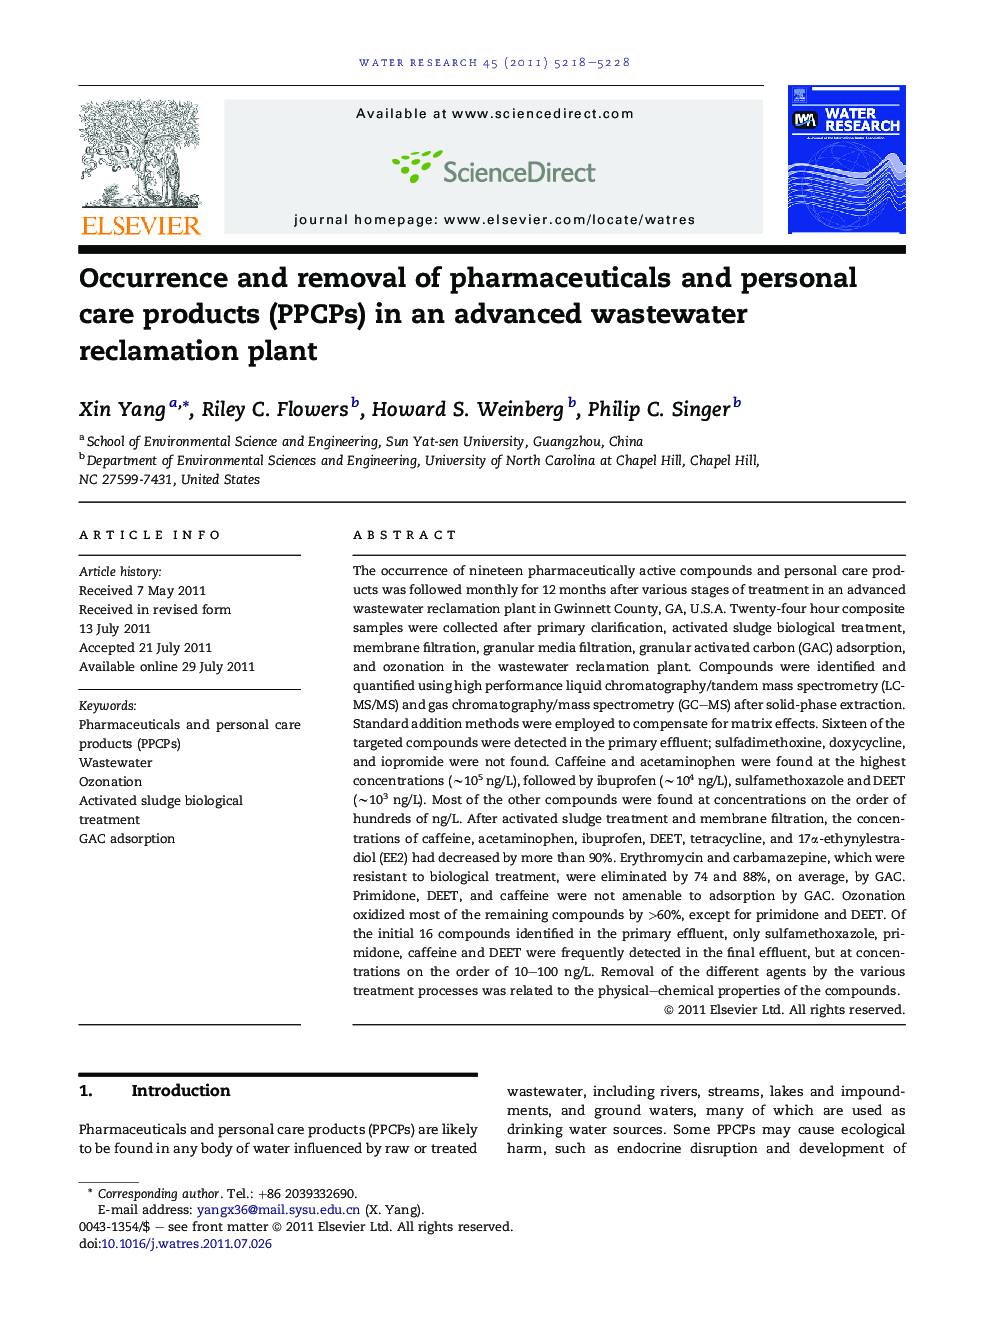 Occurrence and removal of pharmaceuticals and personal care products (PPCPs) in an advanced wastewater reclamation plant